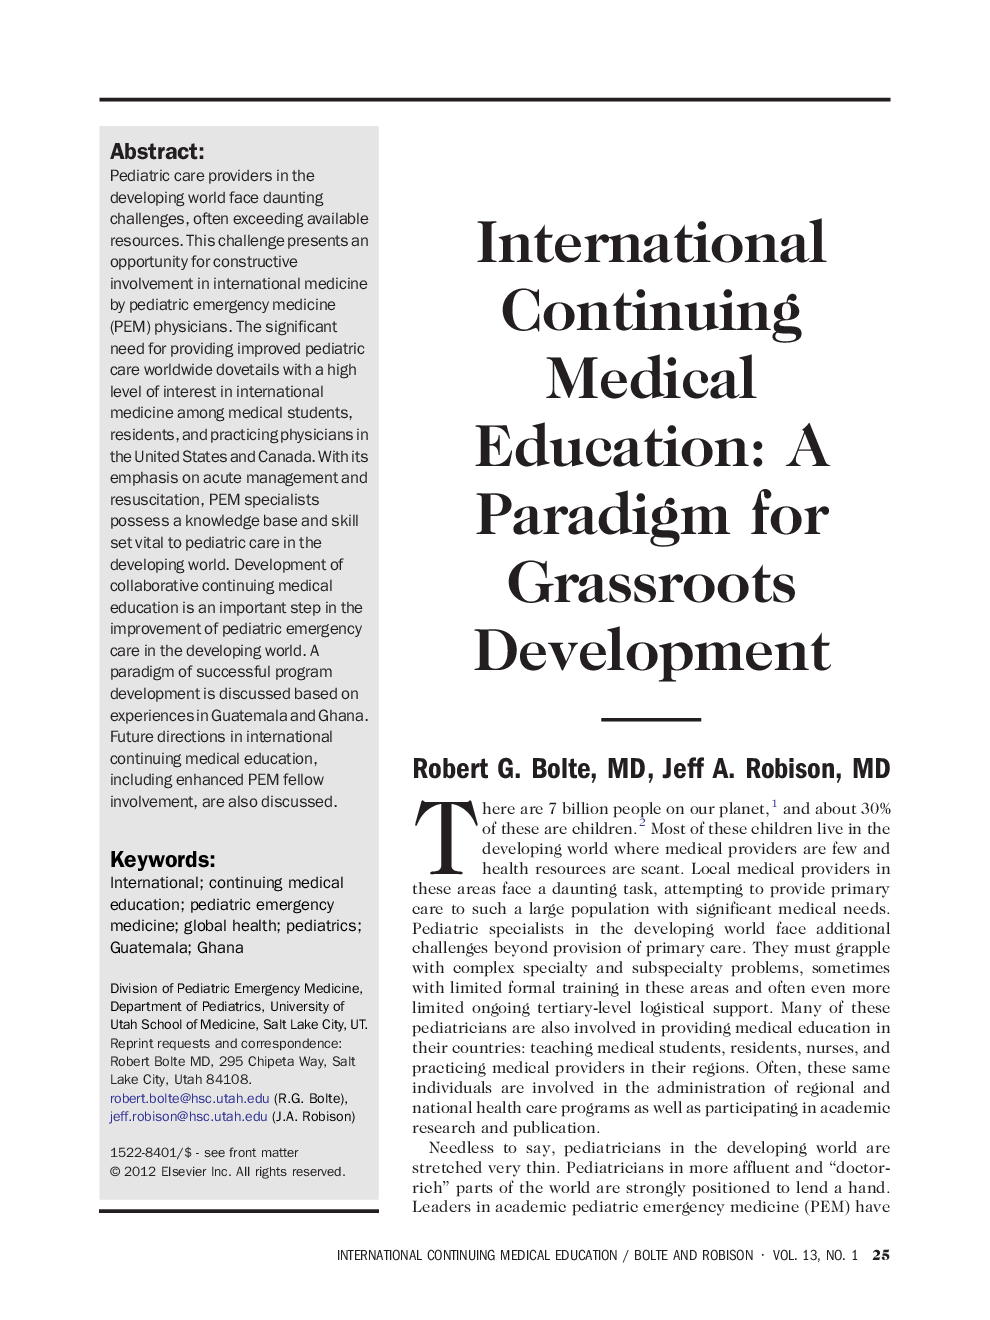 International Continuing Medical Education: A Paradigm for Grassroots Development